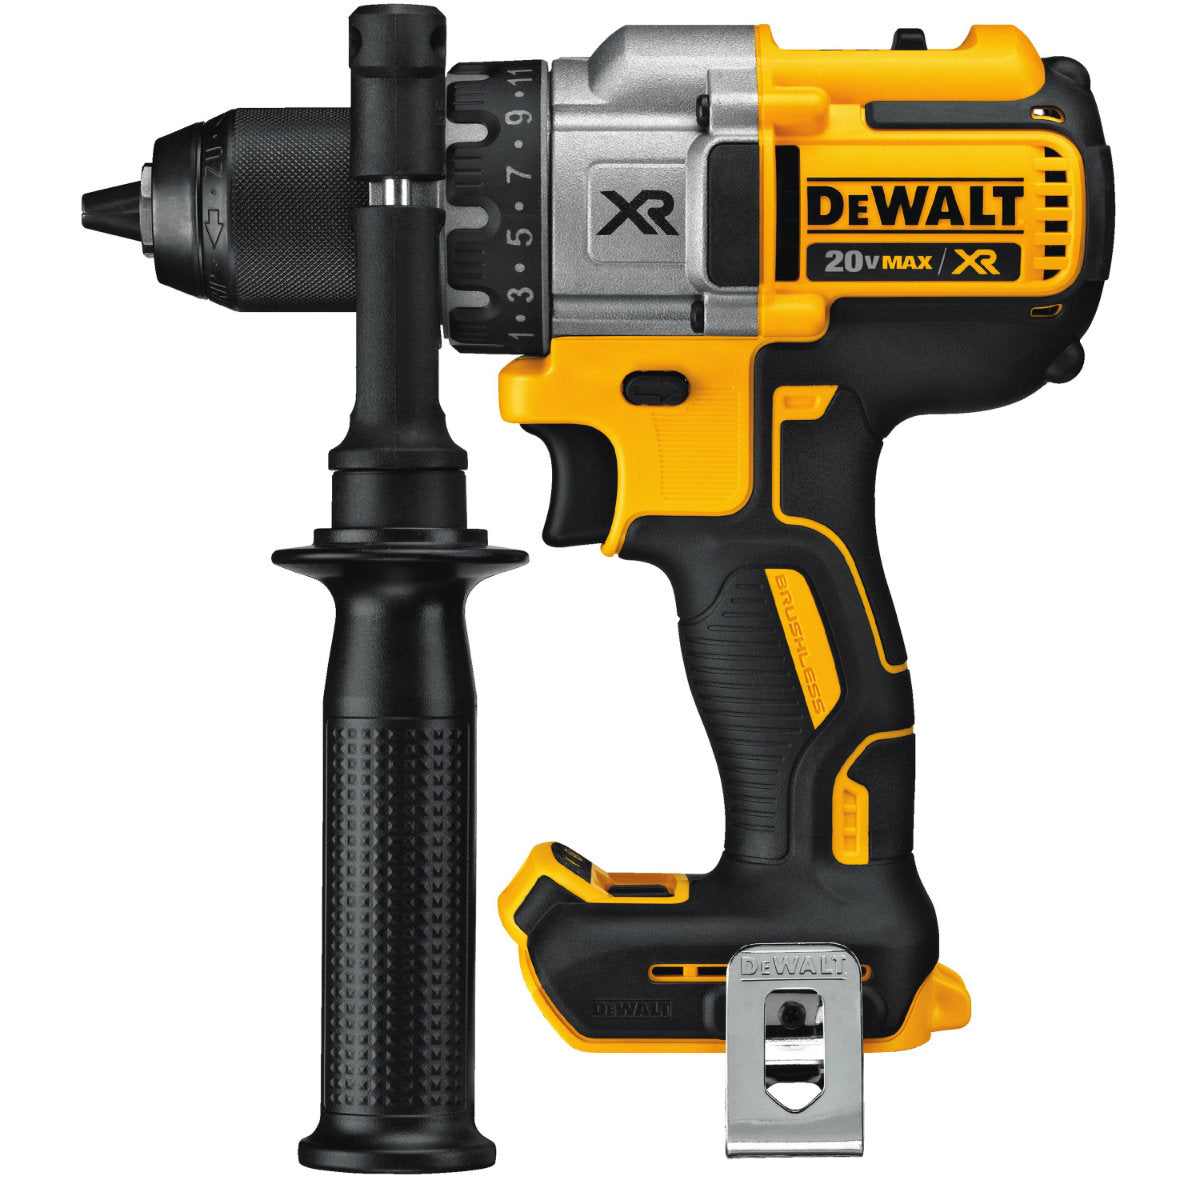 DeWalt DCD991B 20V MAX XR Lithium Ion Brushless 3-Speed Drill/Driver, Tool Only